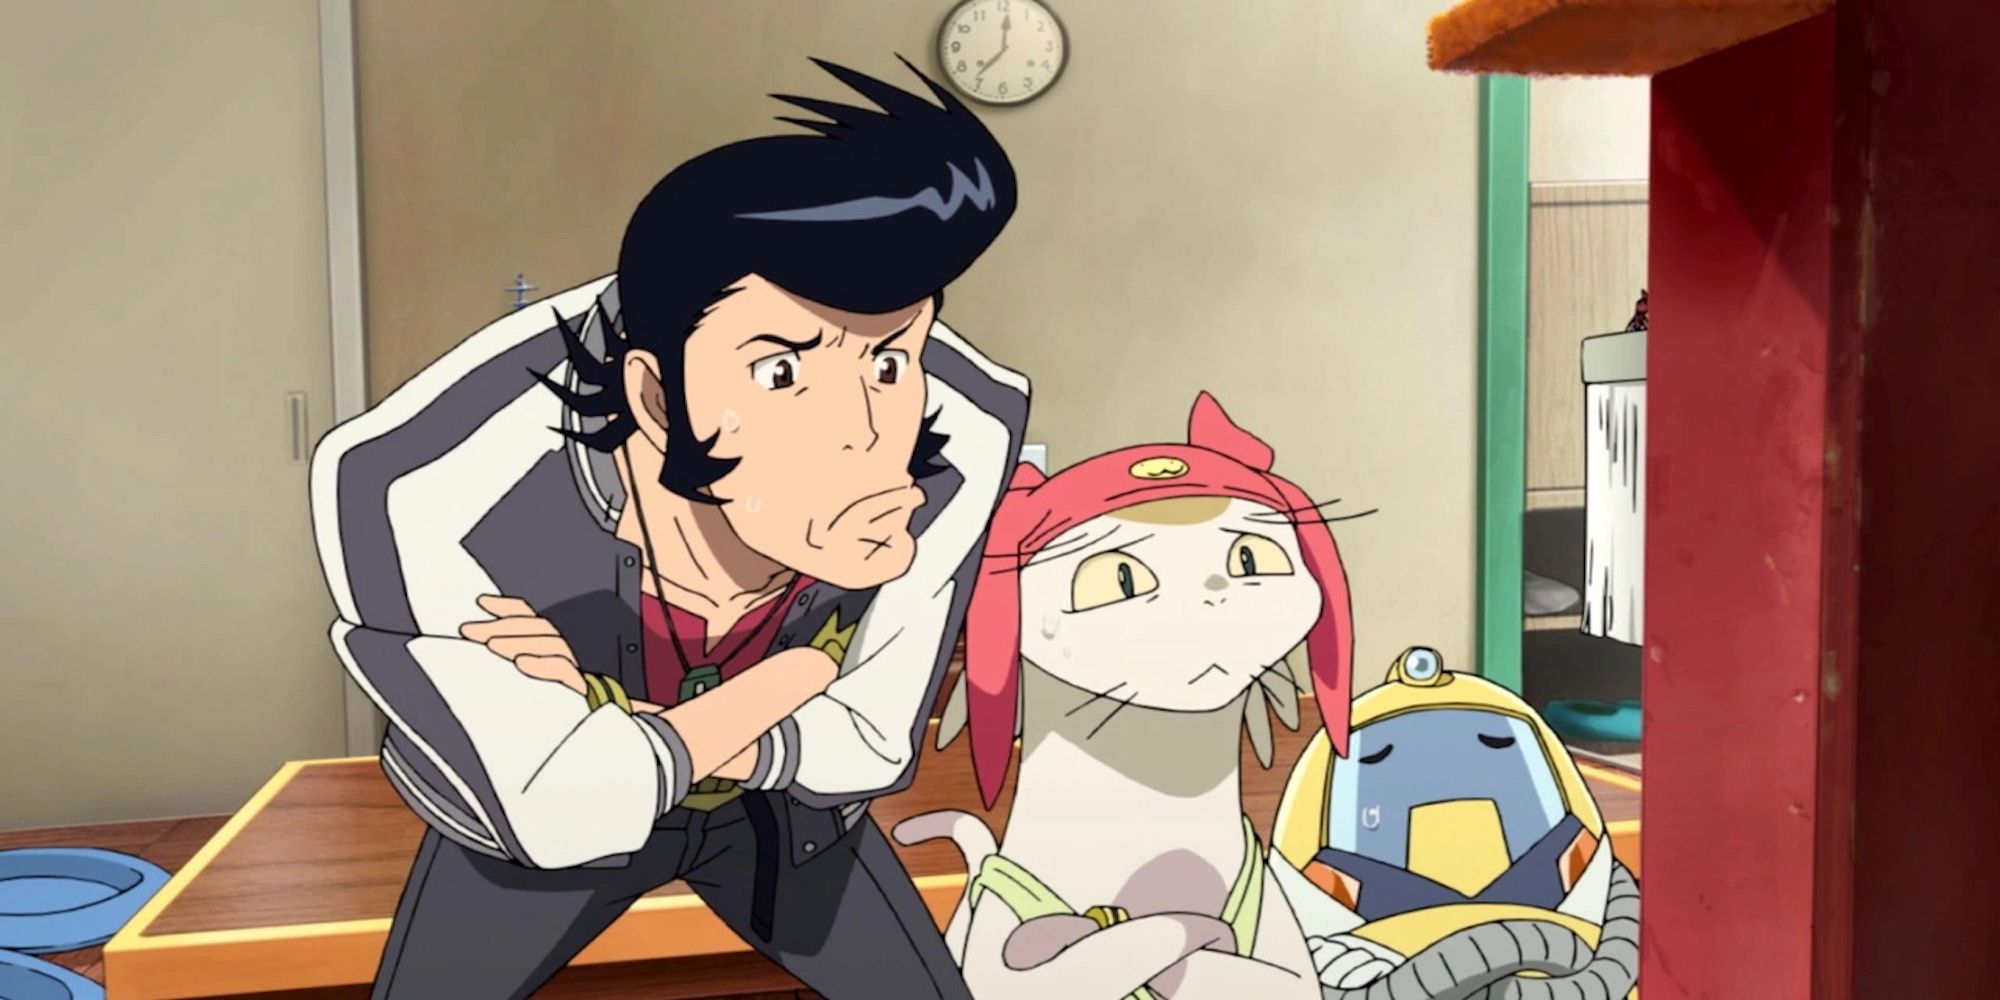 Dandy and Meow (Space Dandy)